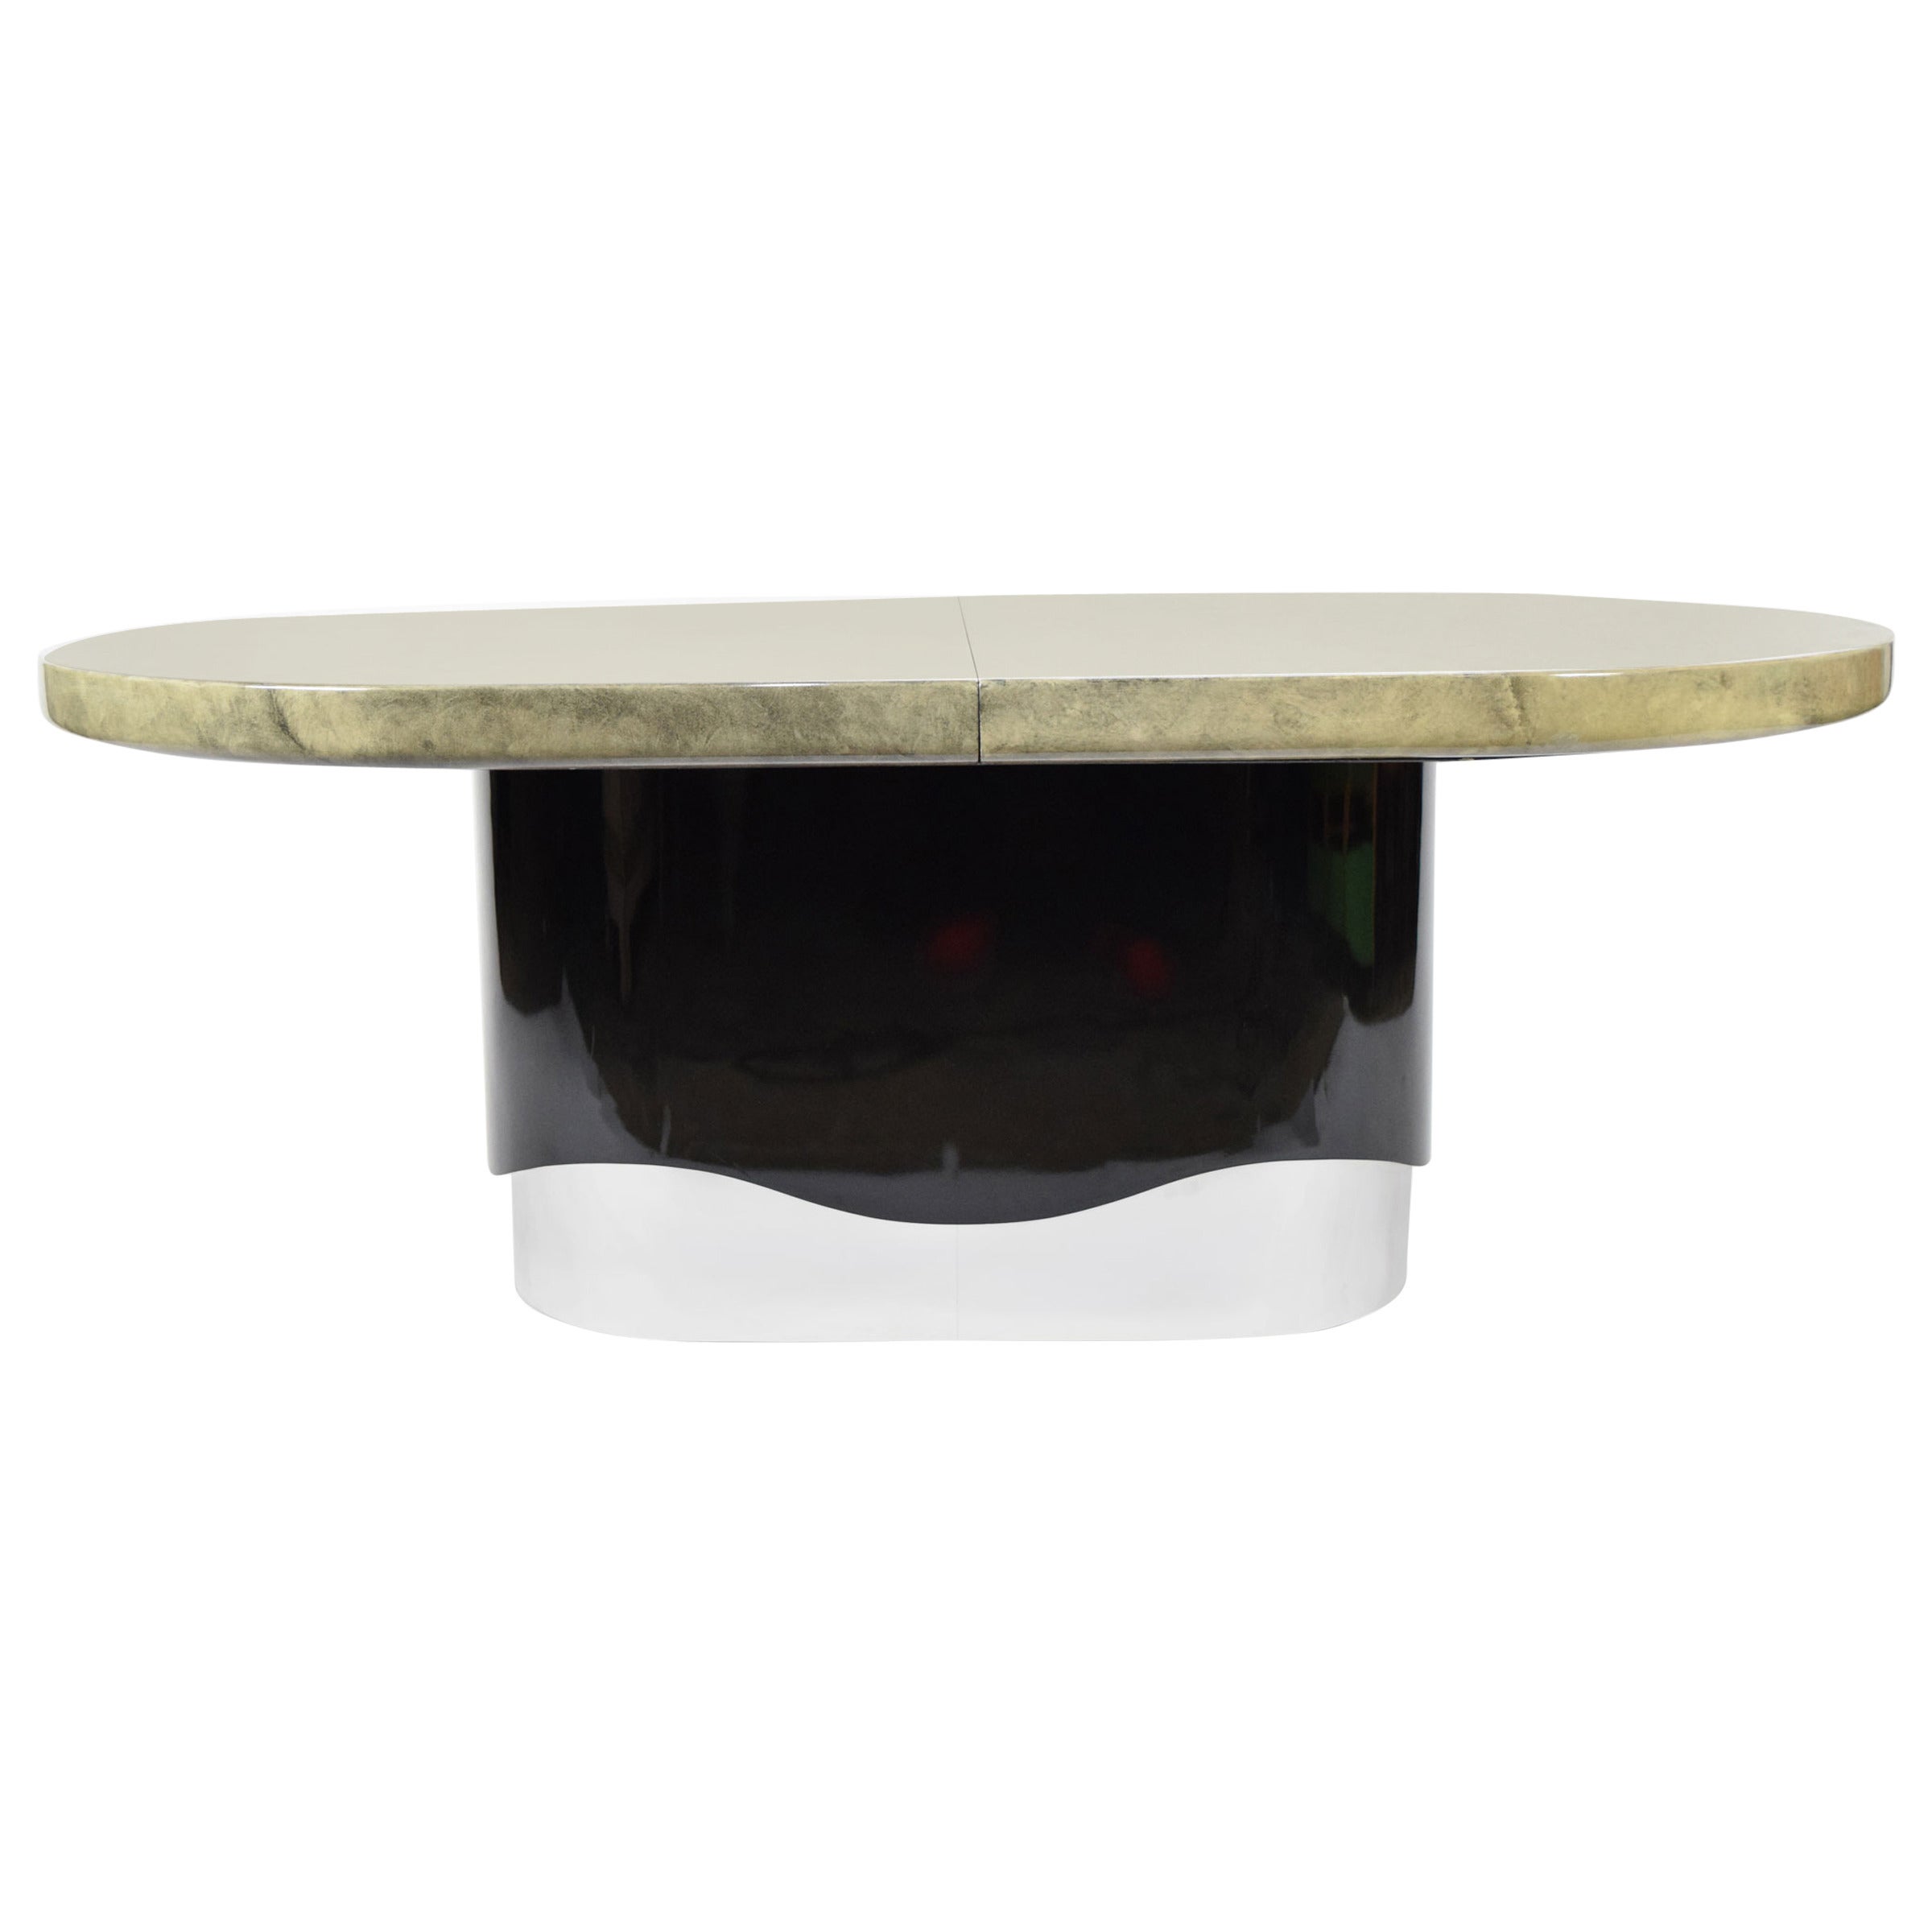 Cantoni High-Gloss Lacquer Faux Goatskin Dining Table